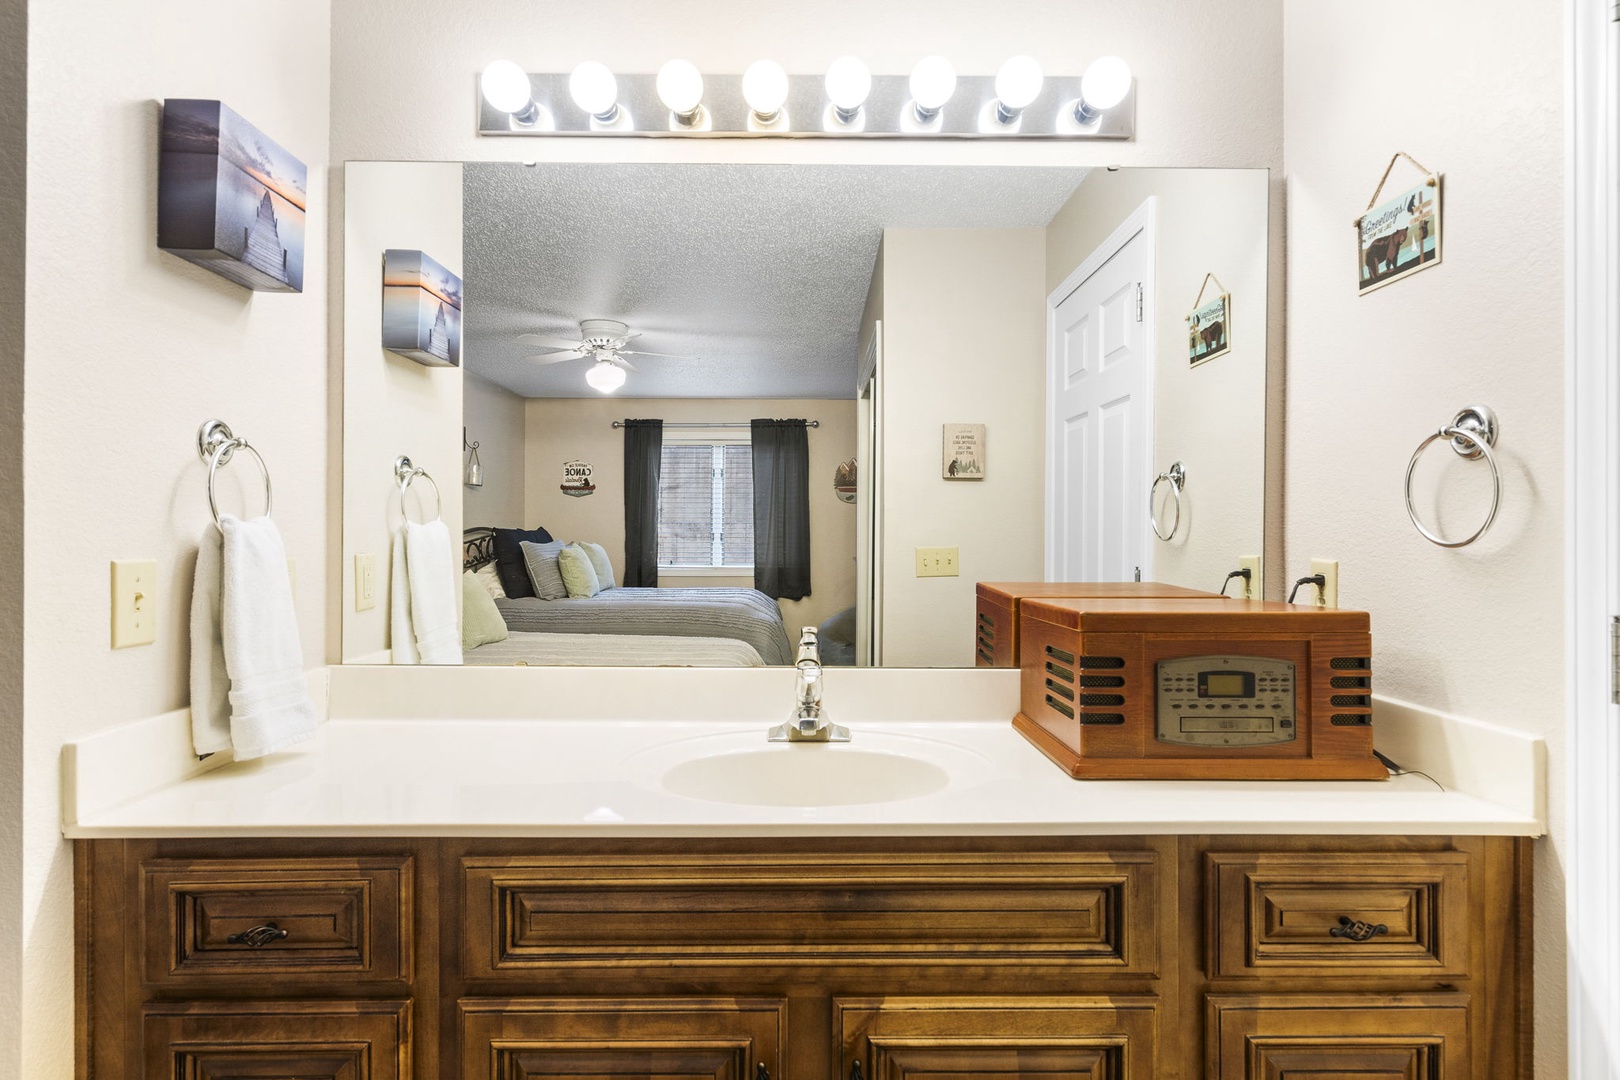 The 2nd ensuite bathroom offers a large single vanity & shower/tub combo